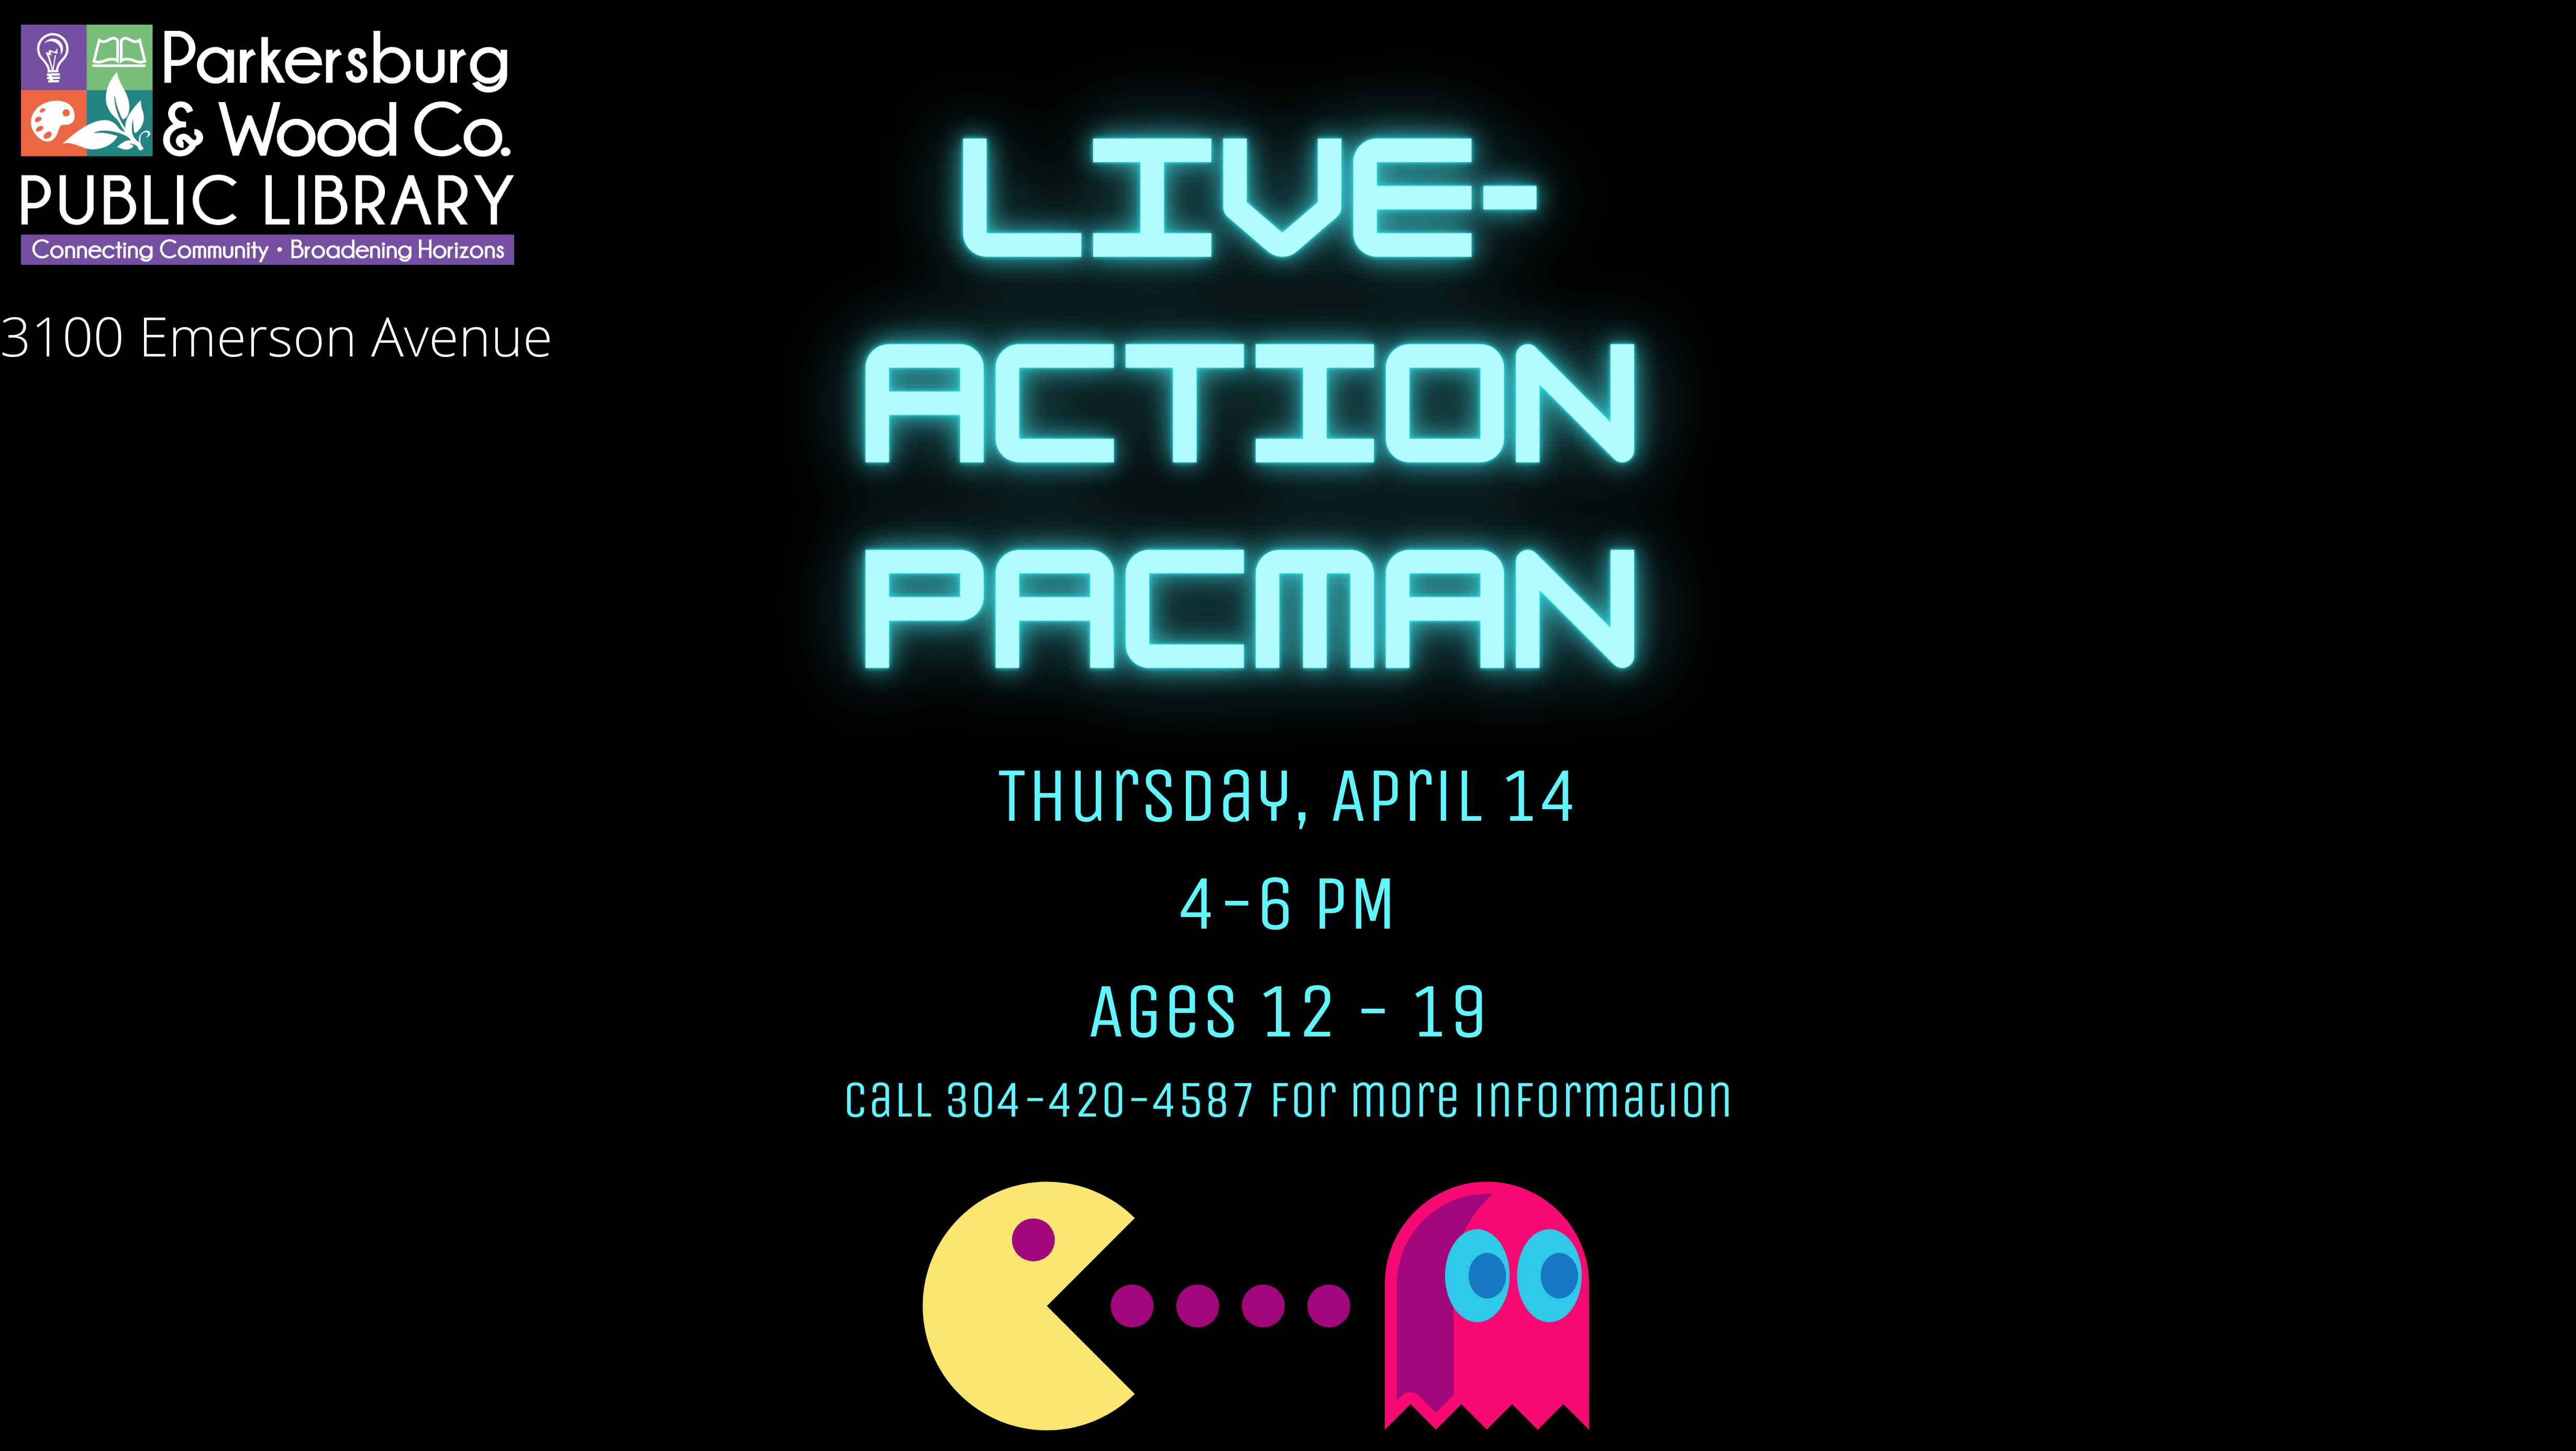 Live-Action PacMan at Emerson